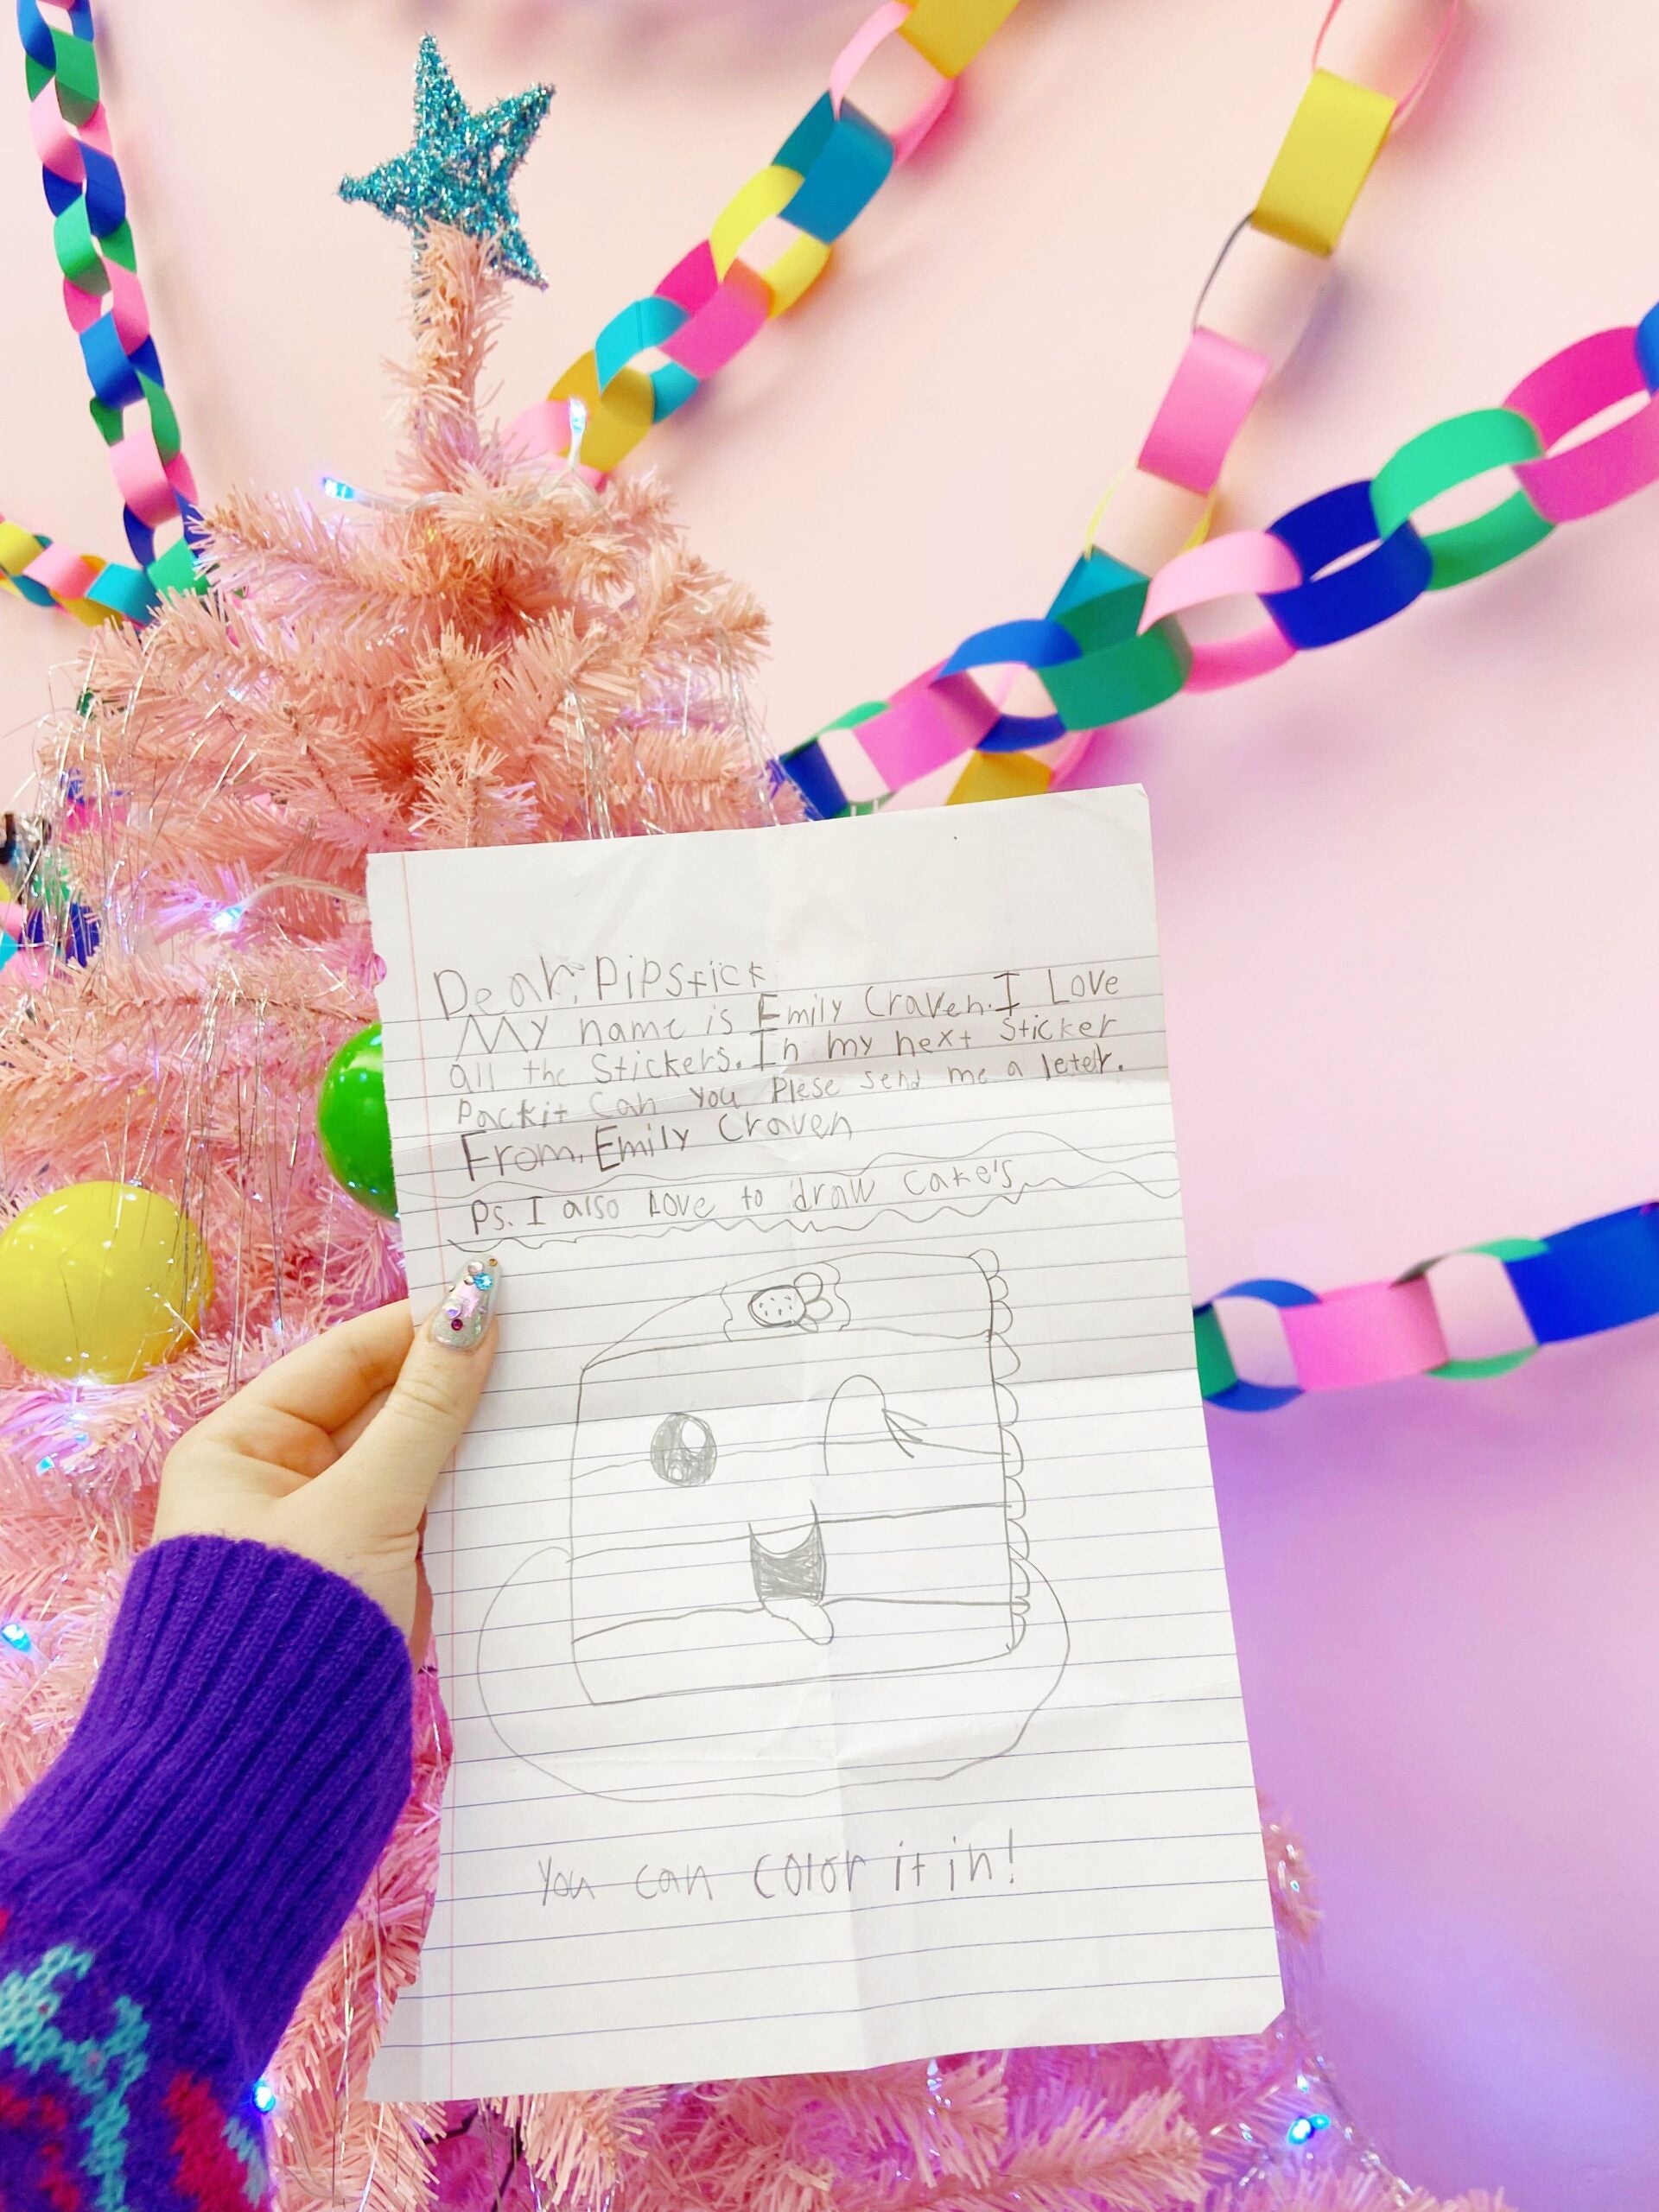 "Dear Pipstick My name is Emily Craven. I Love all the Stickers. In my next Sticker Pocket Can You Plese send me a letter.From Emily Craven Ps. I also love to draw cakes. You can color it in."